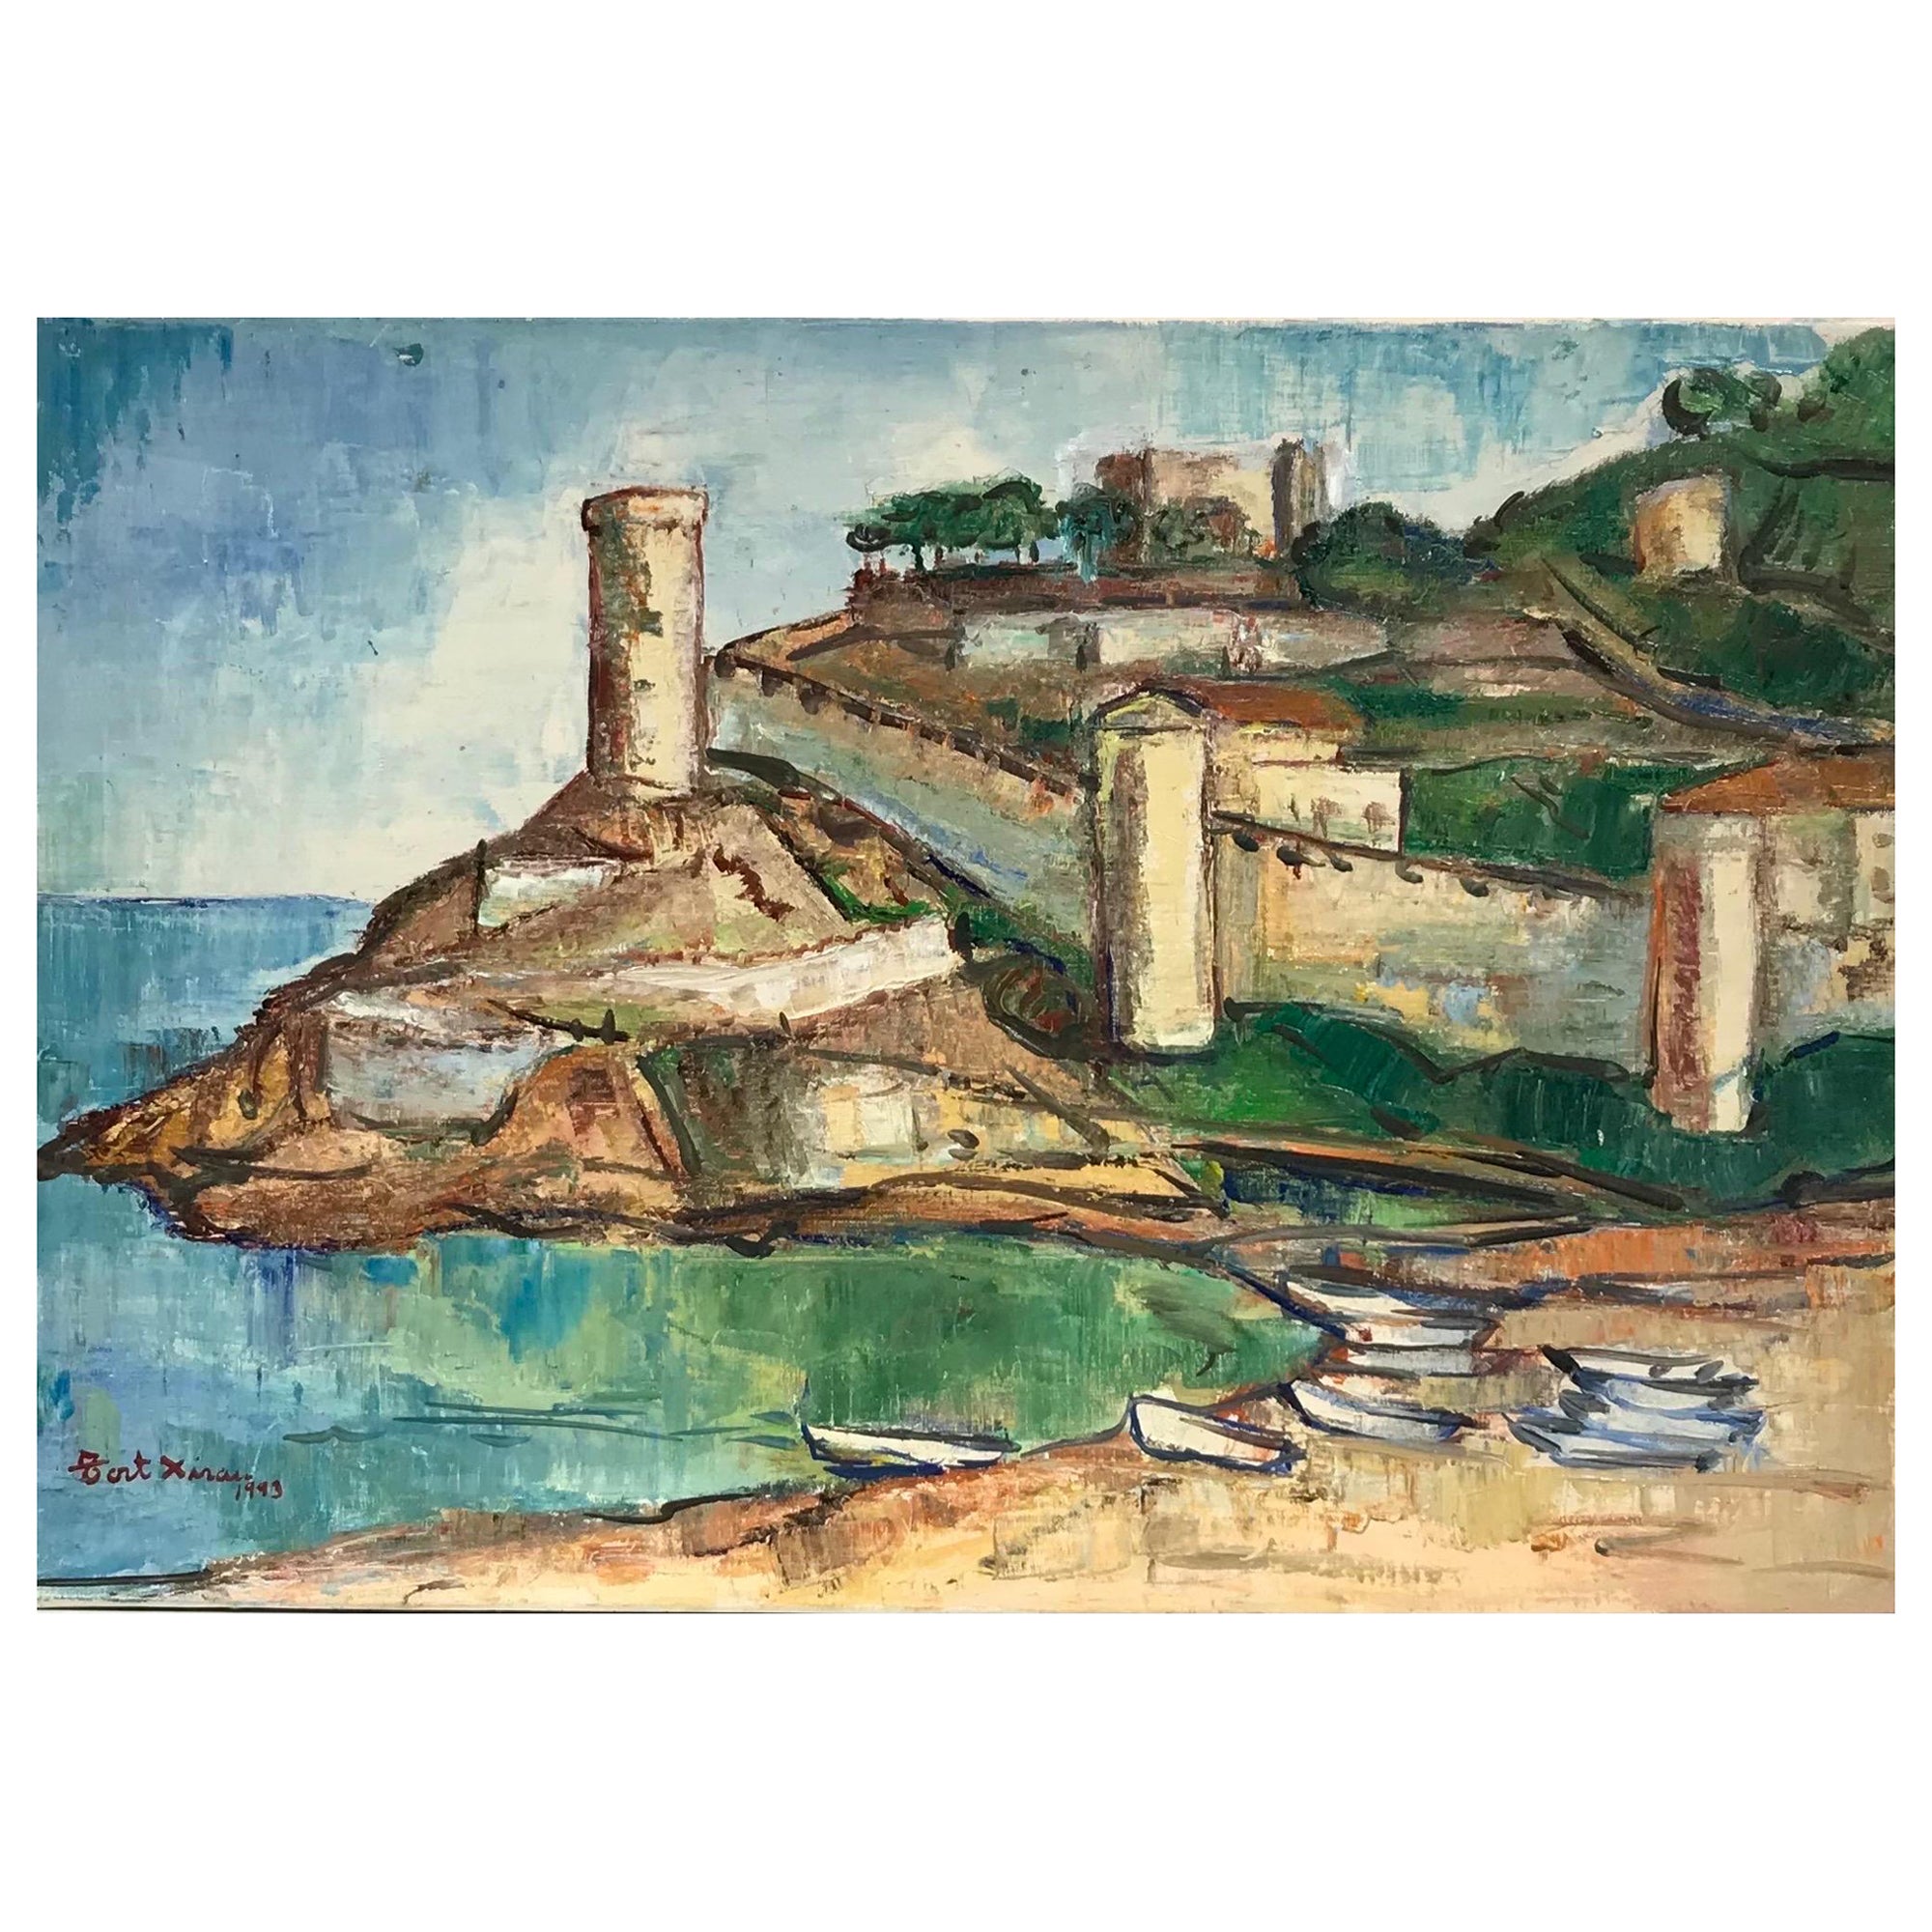 Maria Tort Xirau Landscape Painting - Old Fortress Port Beach Scene on the Med Signed Original Oil Painting